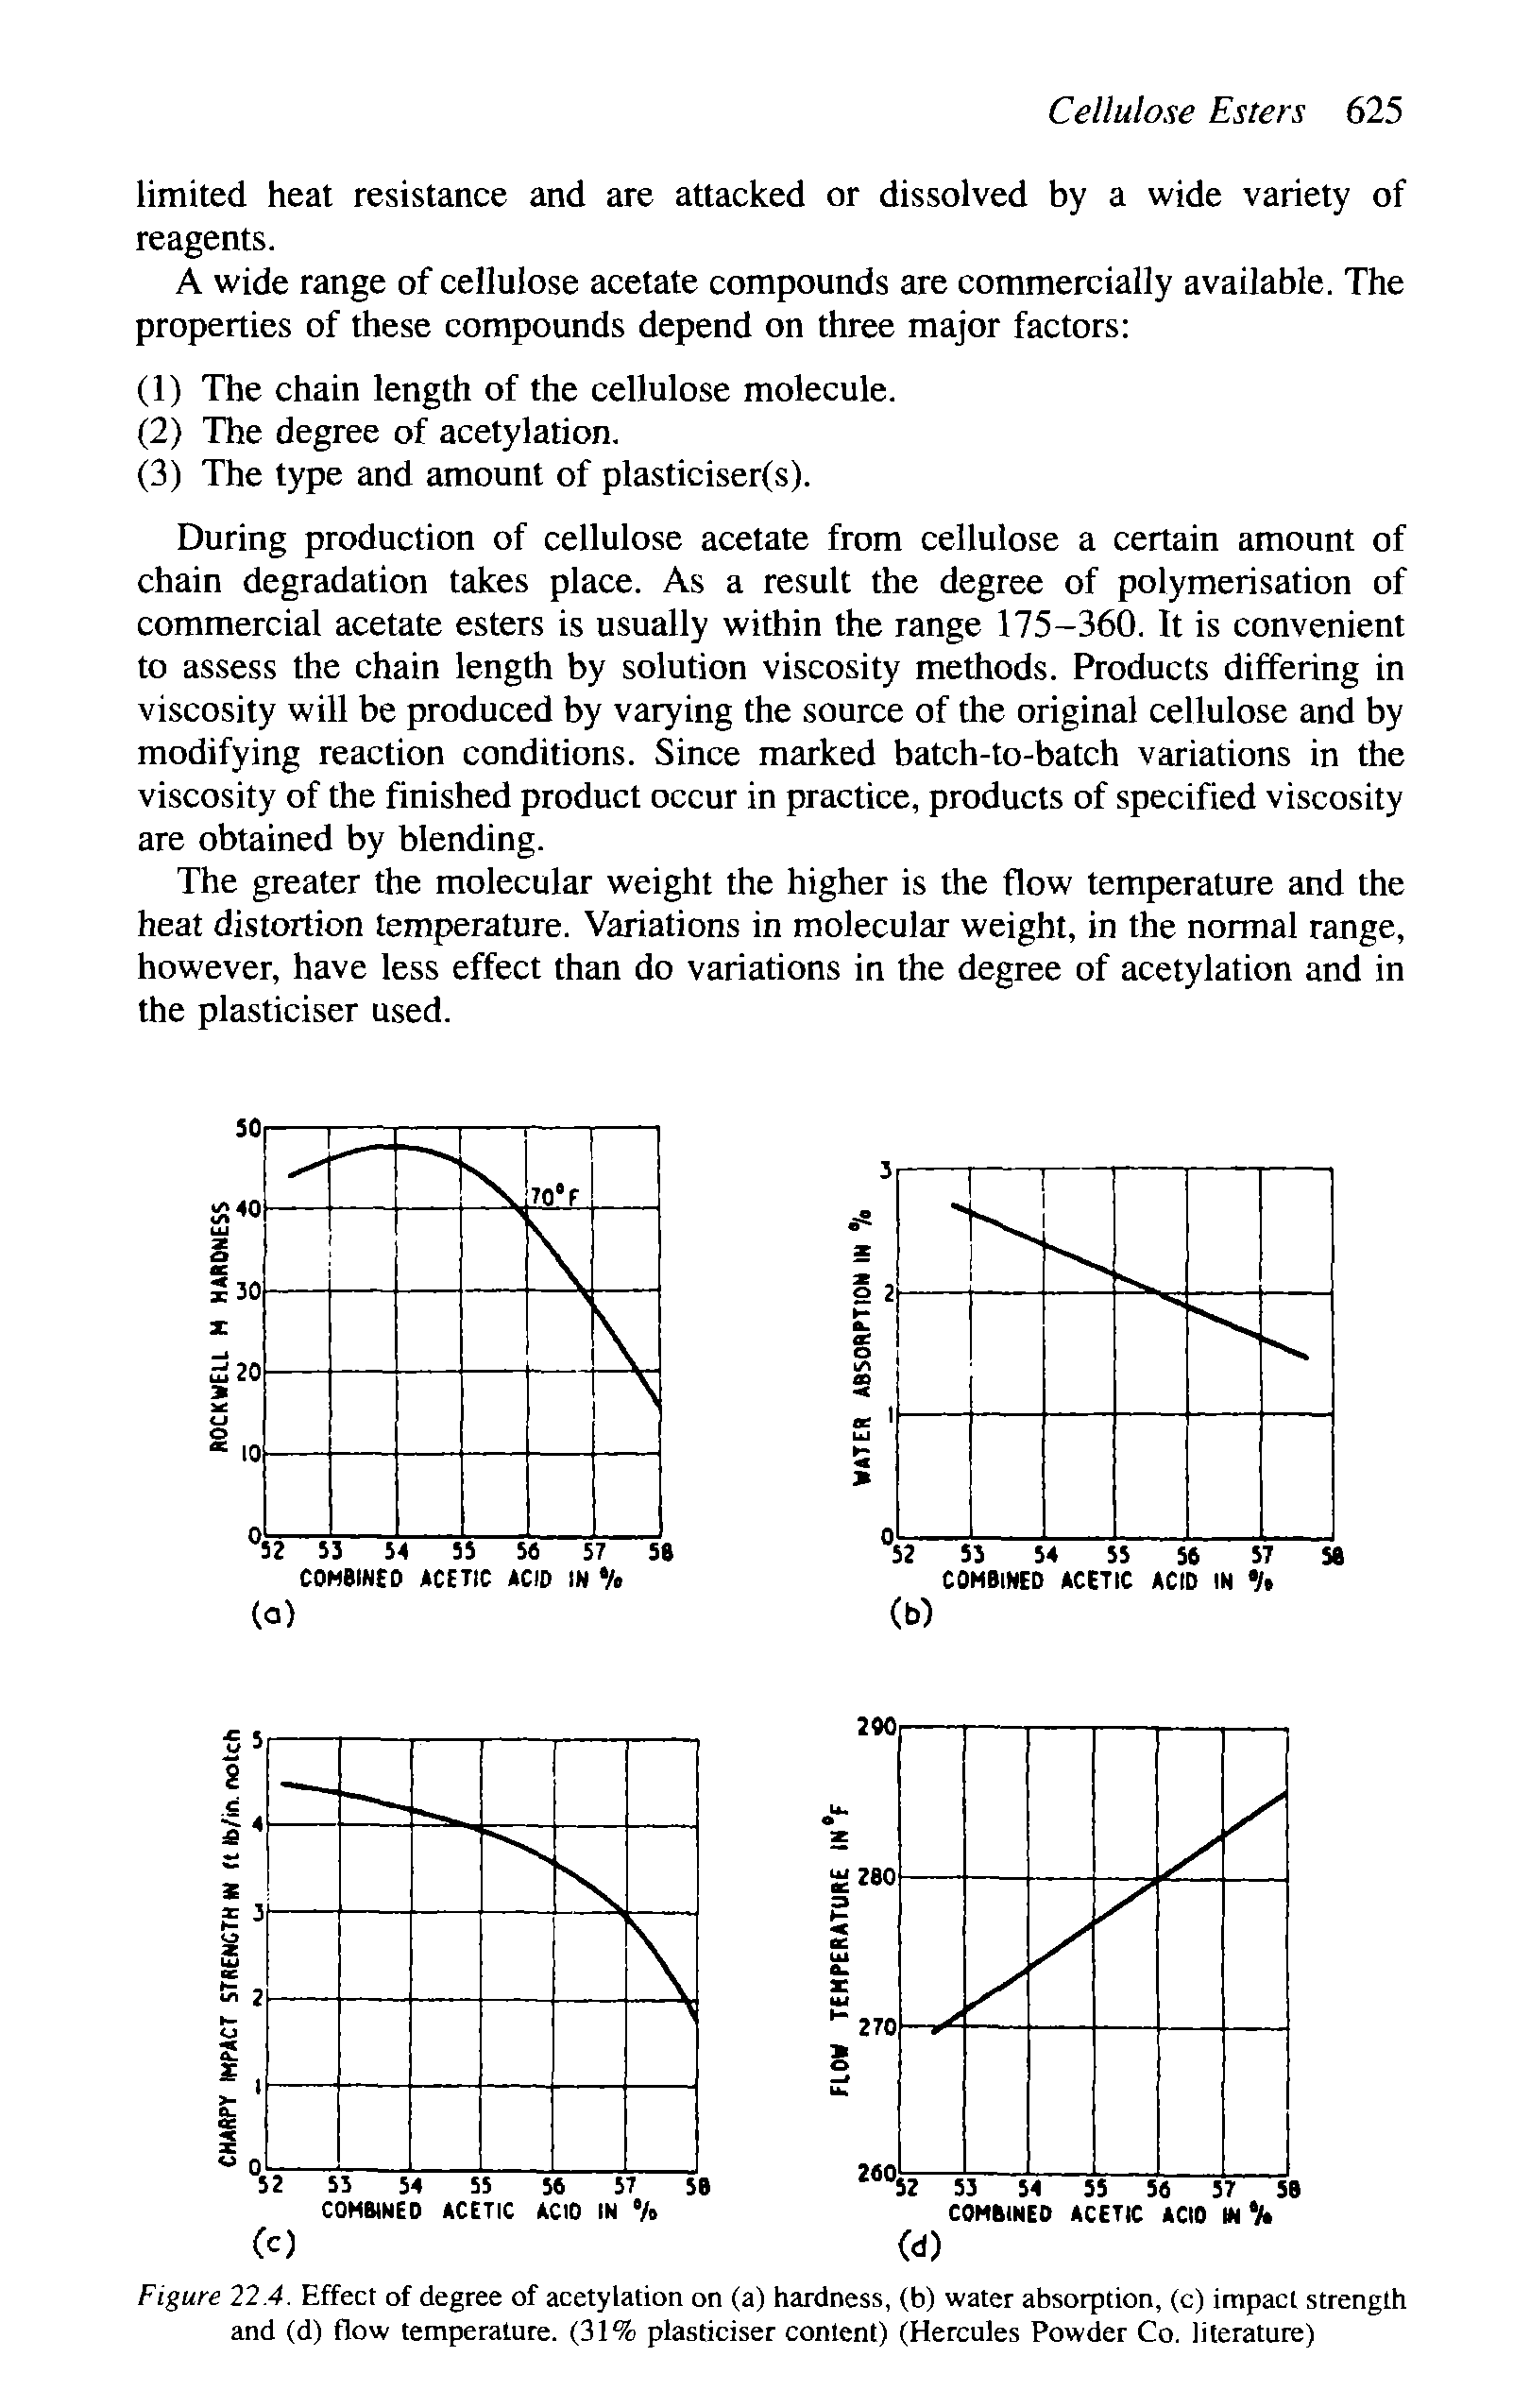 Figure 22.4. Effect of degree of acetylation on (a) hardness, (b) water absorption, (c) impact strength and (d) flow temperature. (31% plasticiser content) (Hercules Powder Co. literature)...